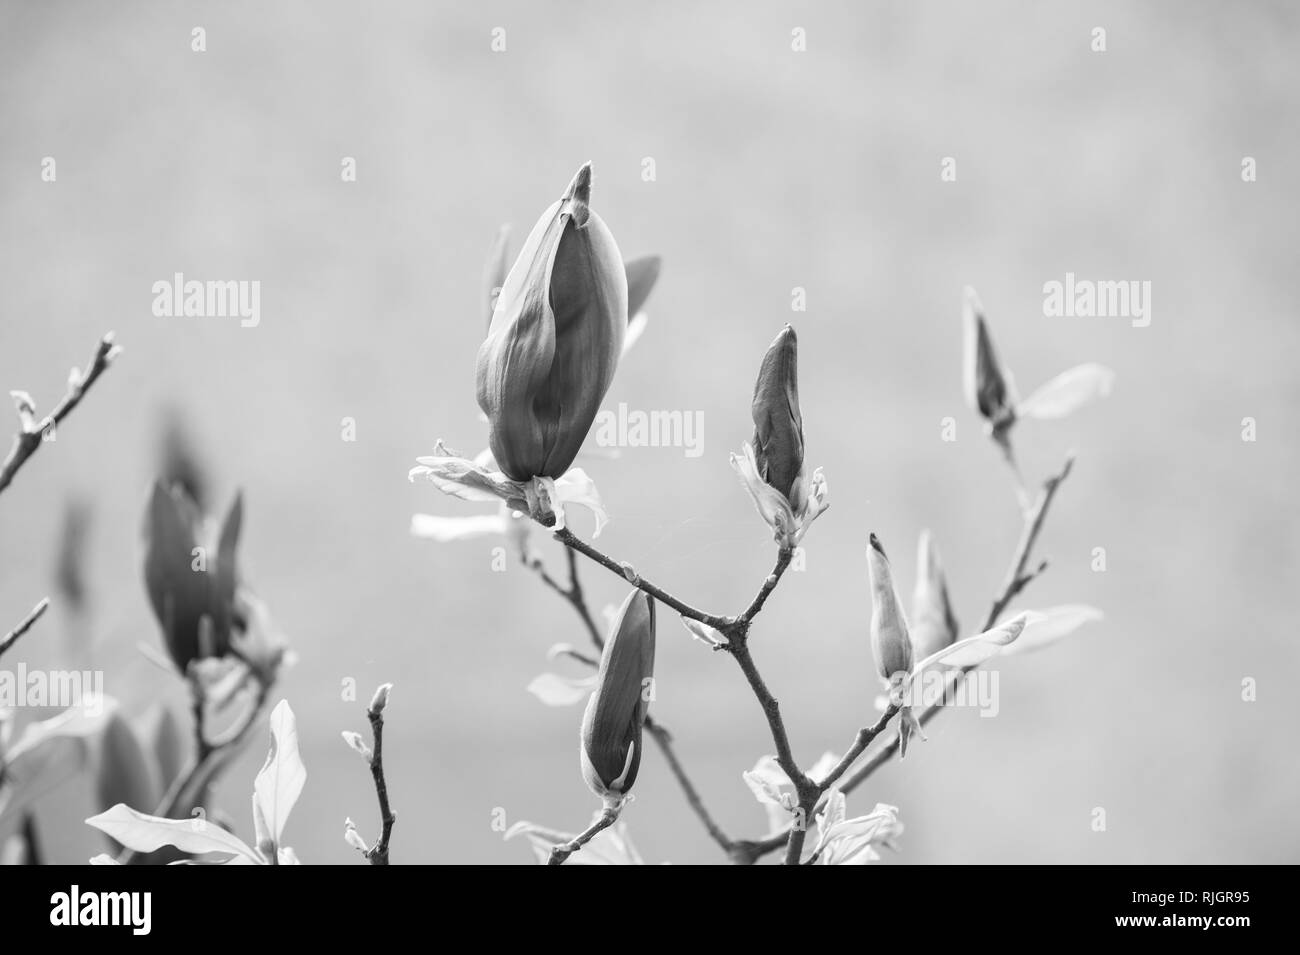 New life awakening. Blossoming magnolia branch with purple flowers on blurred background. Spring season concept. Blossom, bloom, flowering. Nature, beauty, environment. Stock Photo